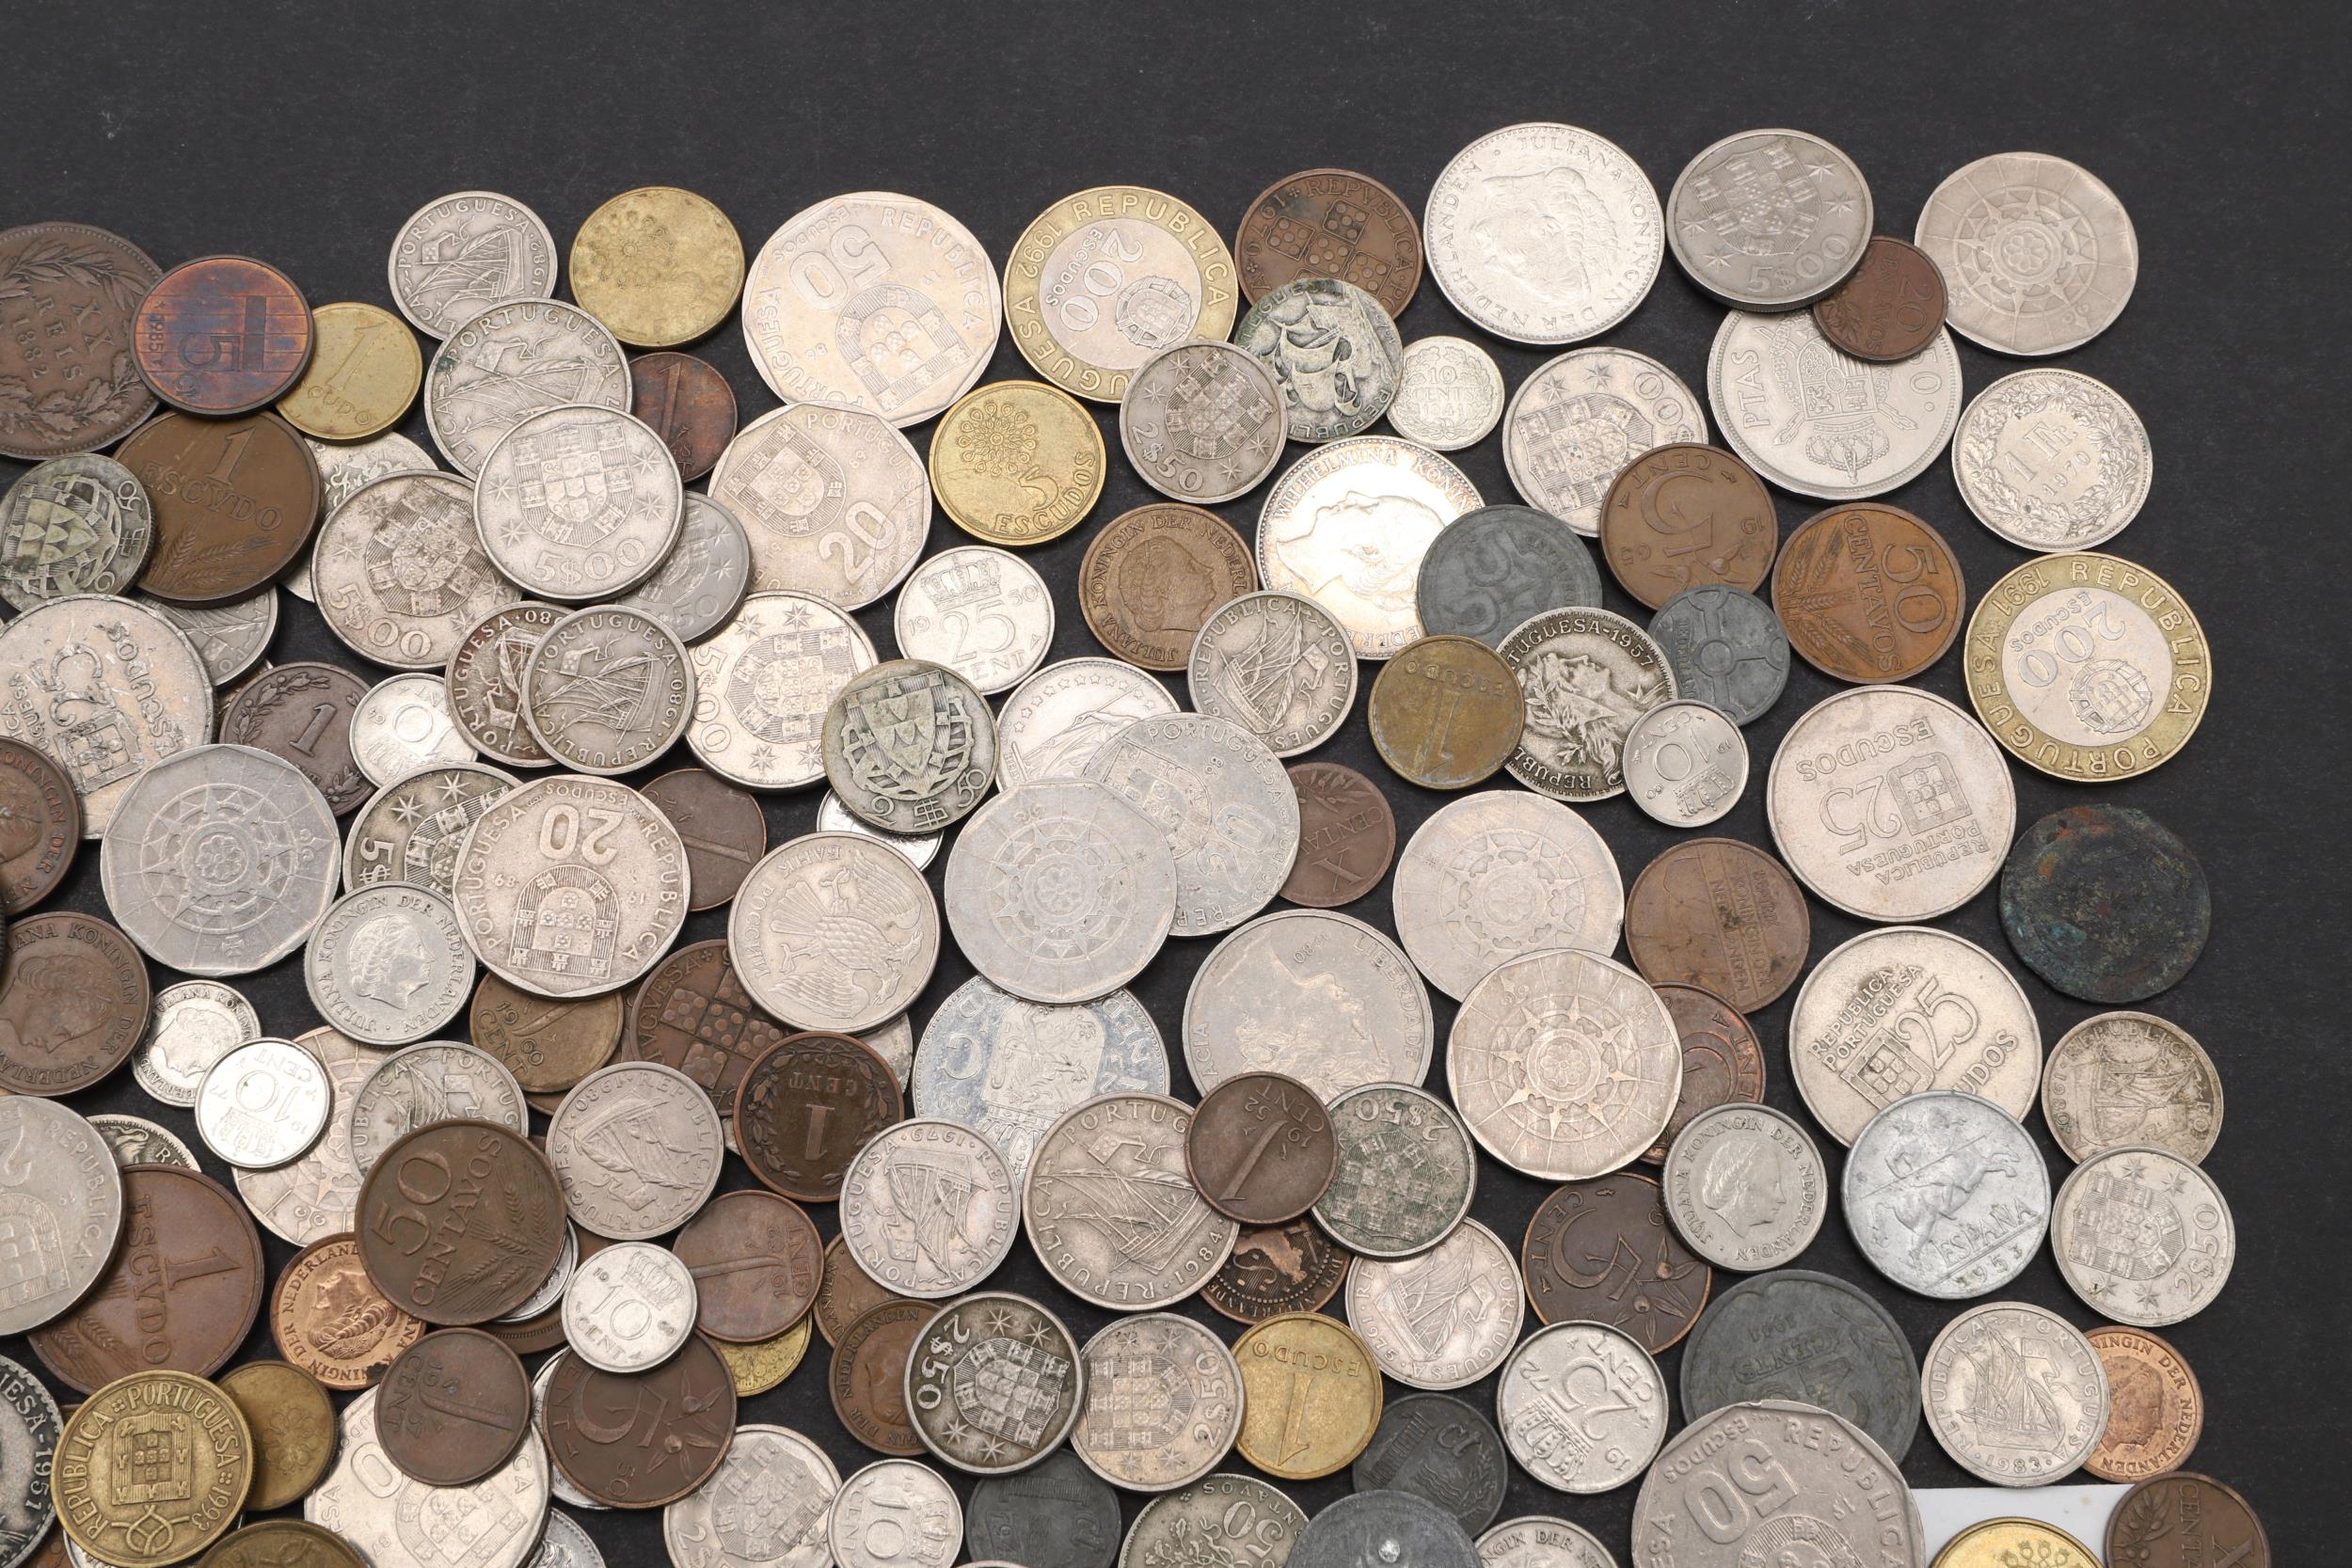 A MIXED COLLECTION OF PORTUGUESE, DUTCH AND OTHER WORLD COINS. - Image 3 of 5